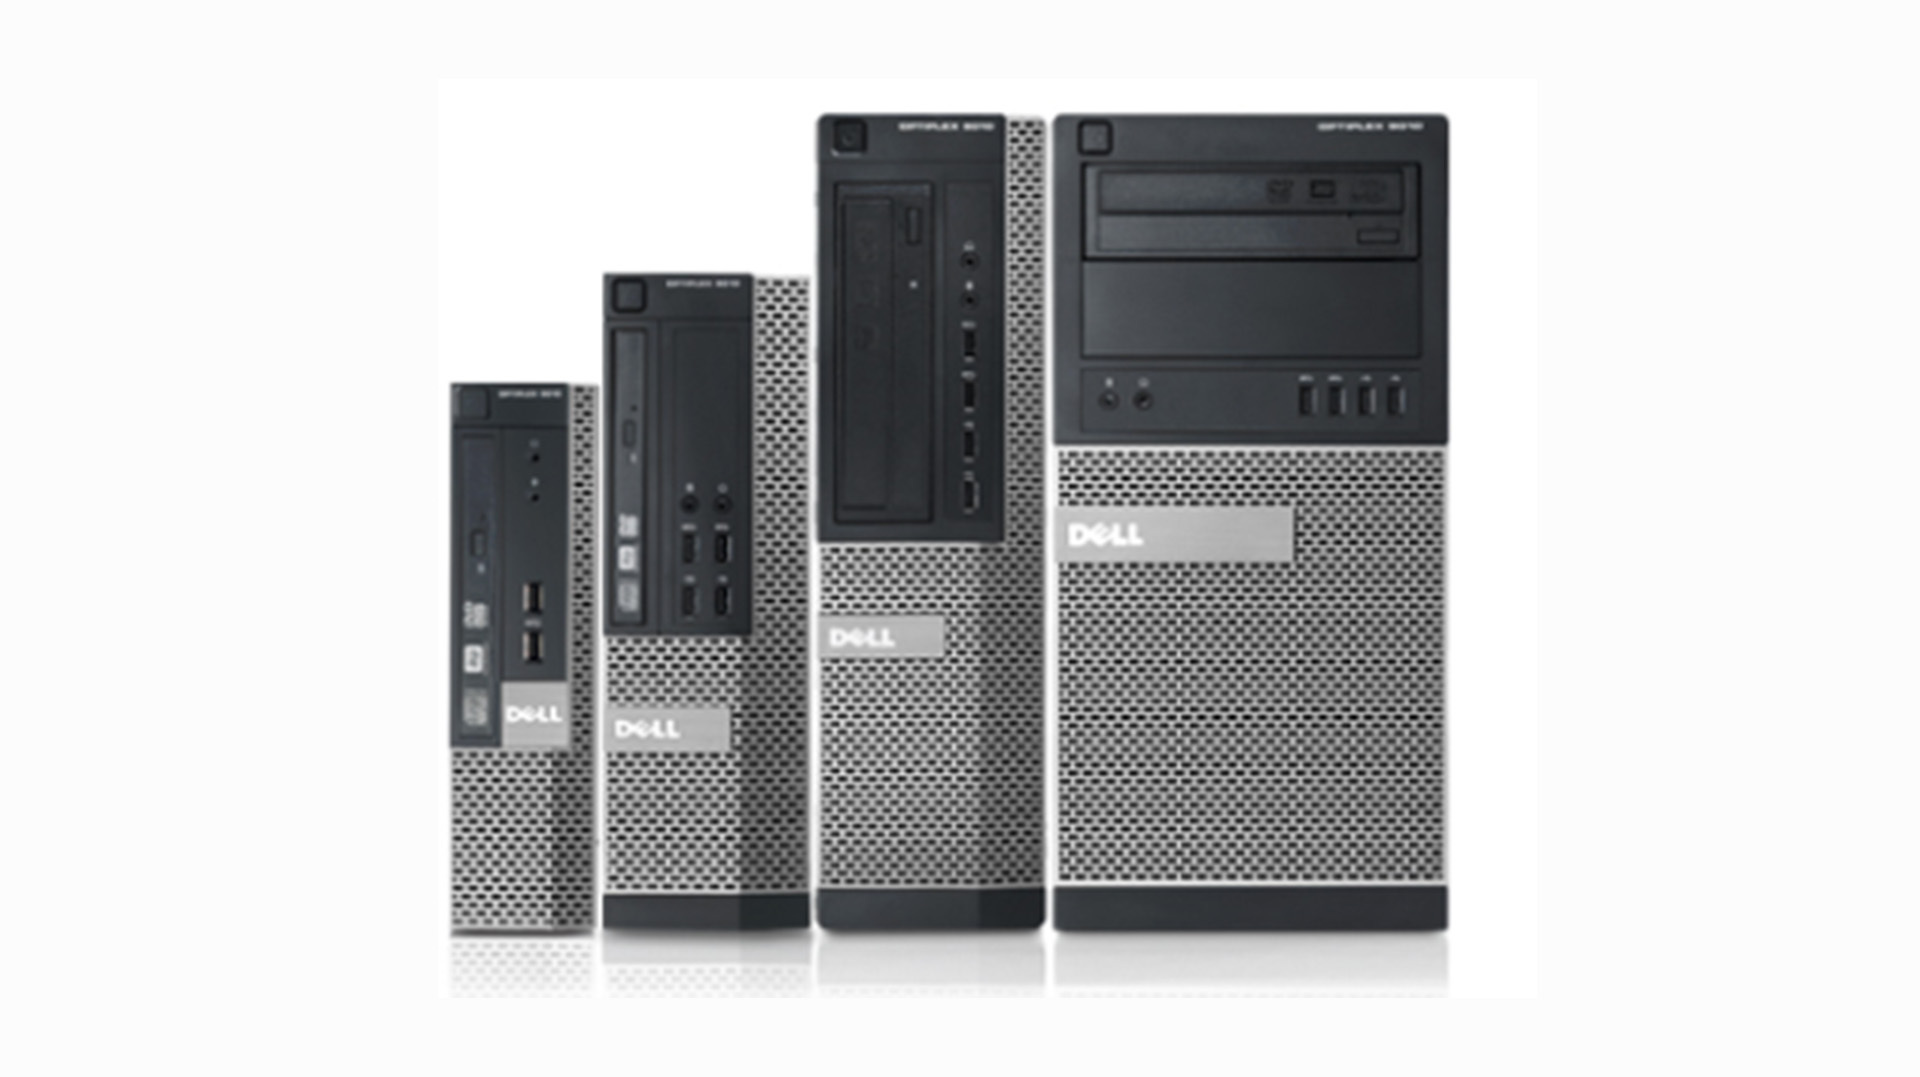 Dell OptiPlex 3020 Micro: Specs and Rack Compatibility - RackSolutions